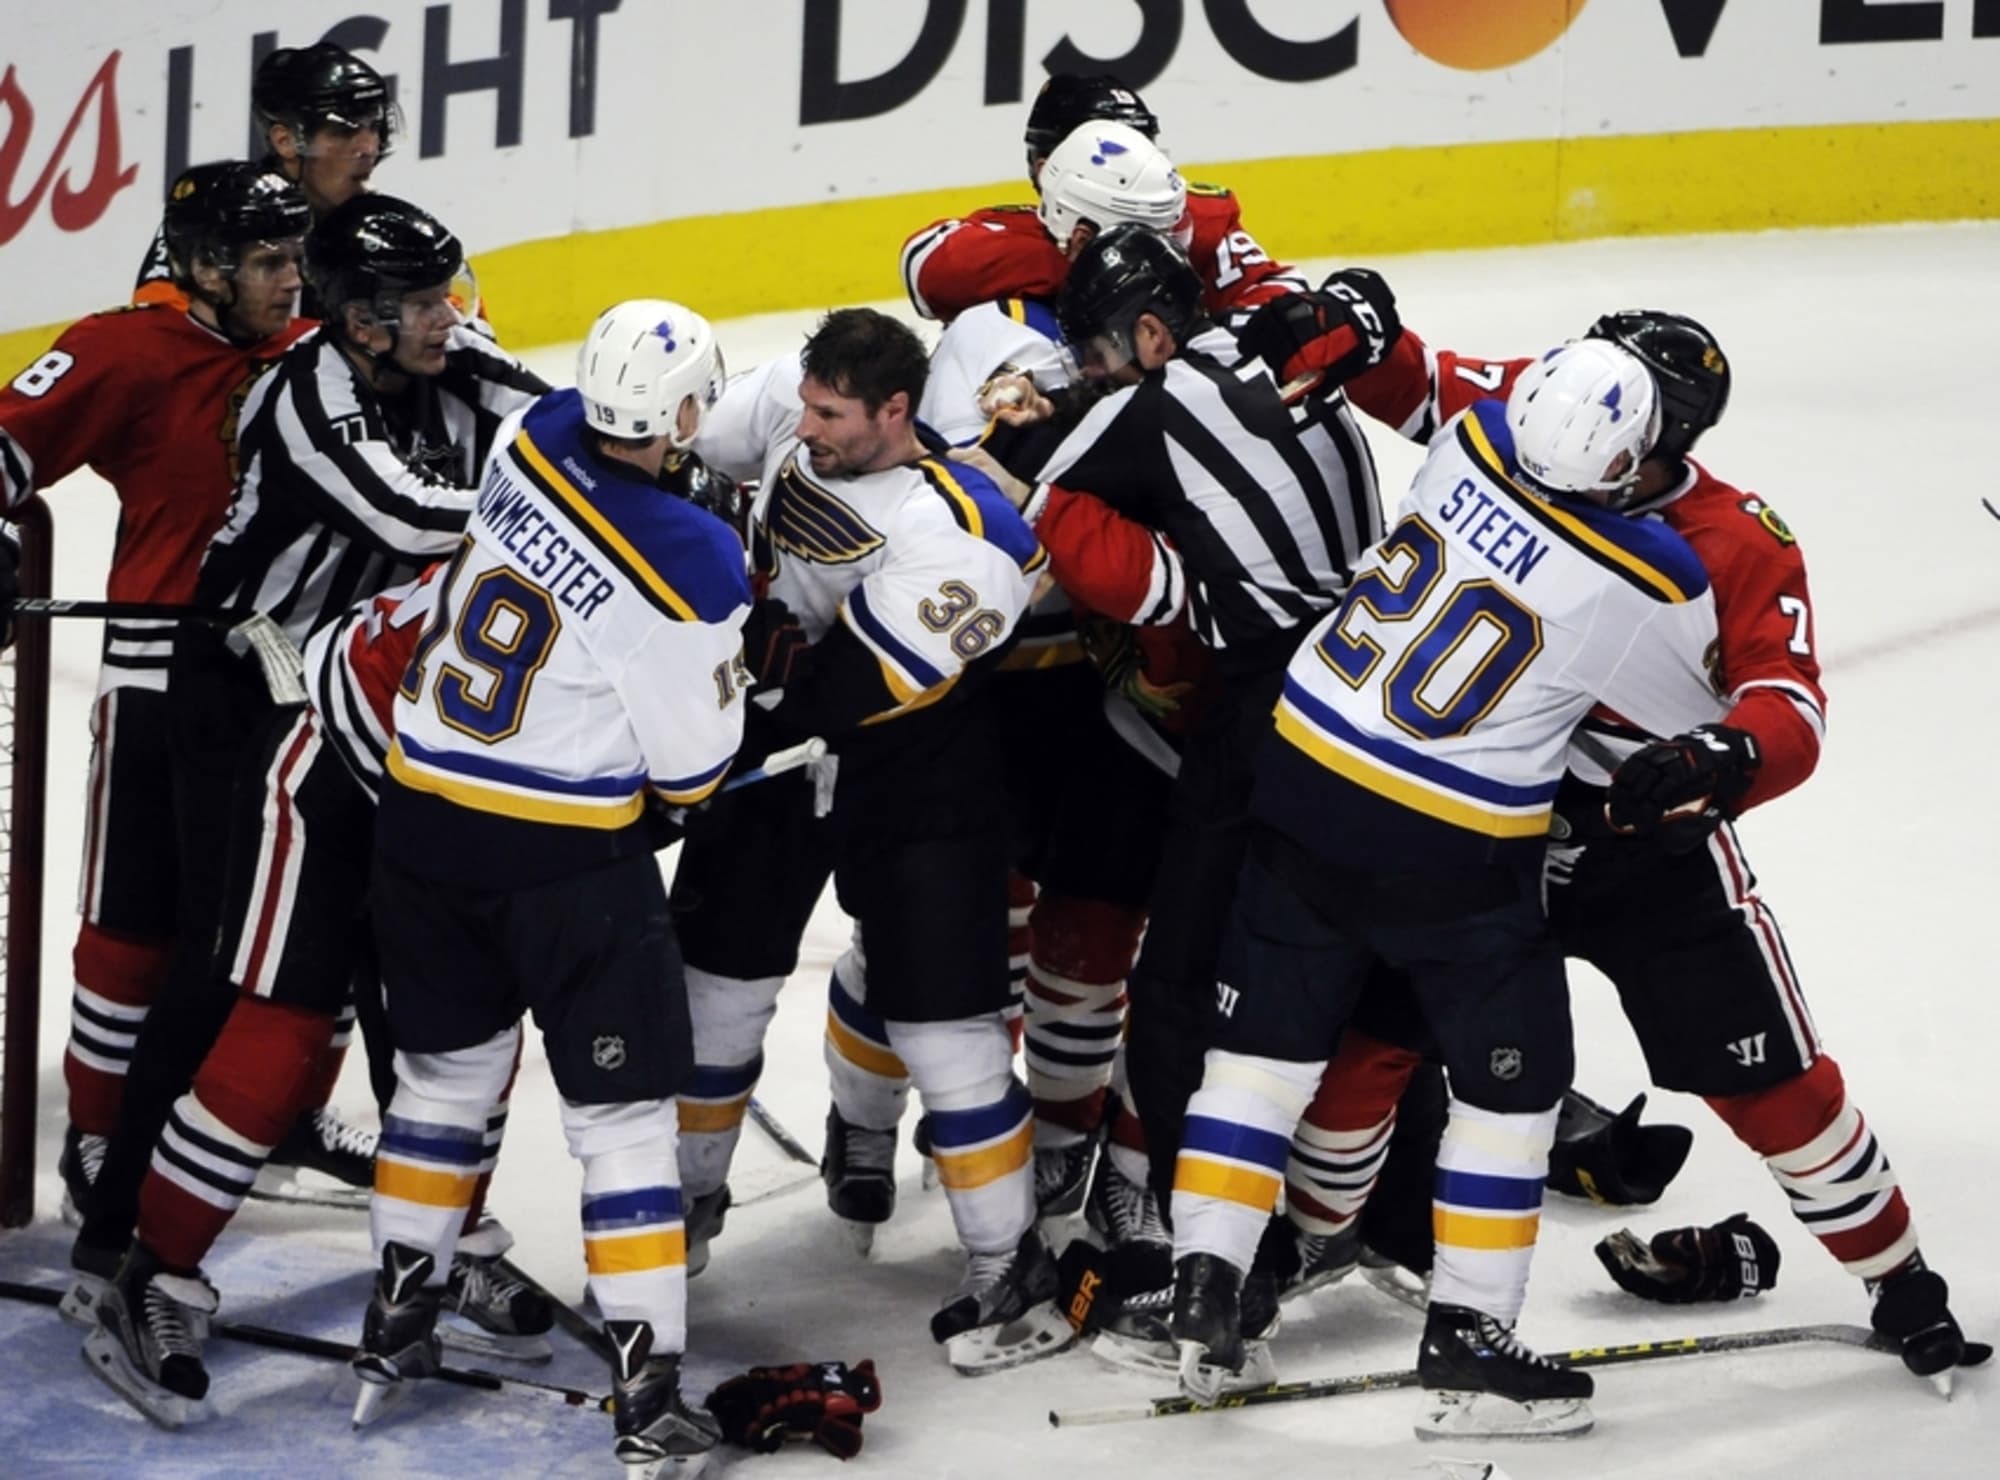 St. Louis Blues Try to Lock Up Series Victory Over Blackhawks